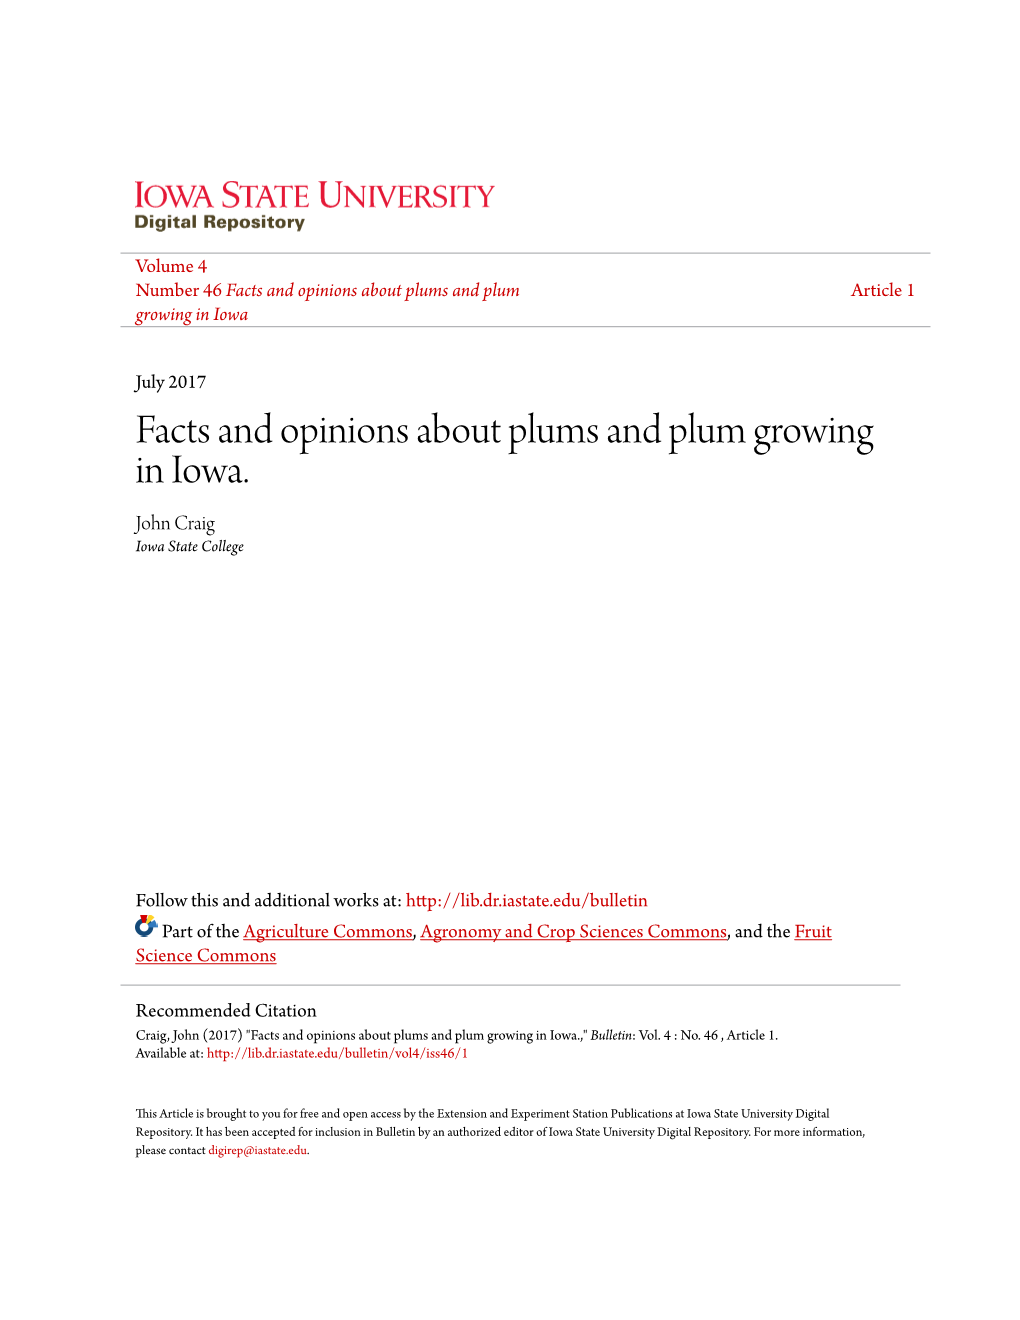 Facts and Opinions About Plums and Plum Growing in Iowa. John Craig Iowa State College